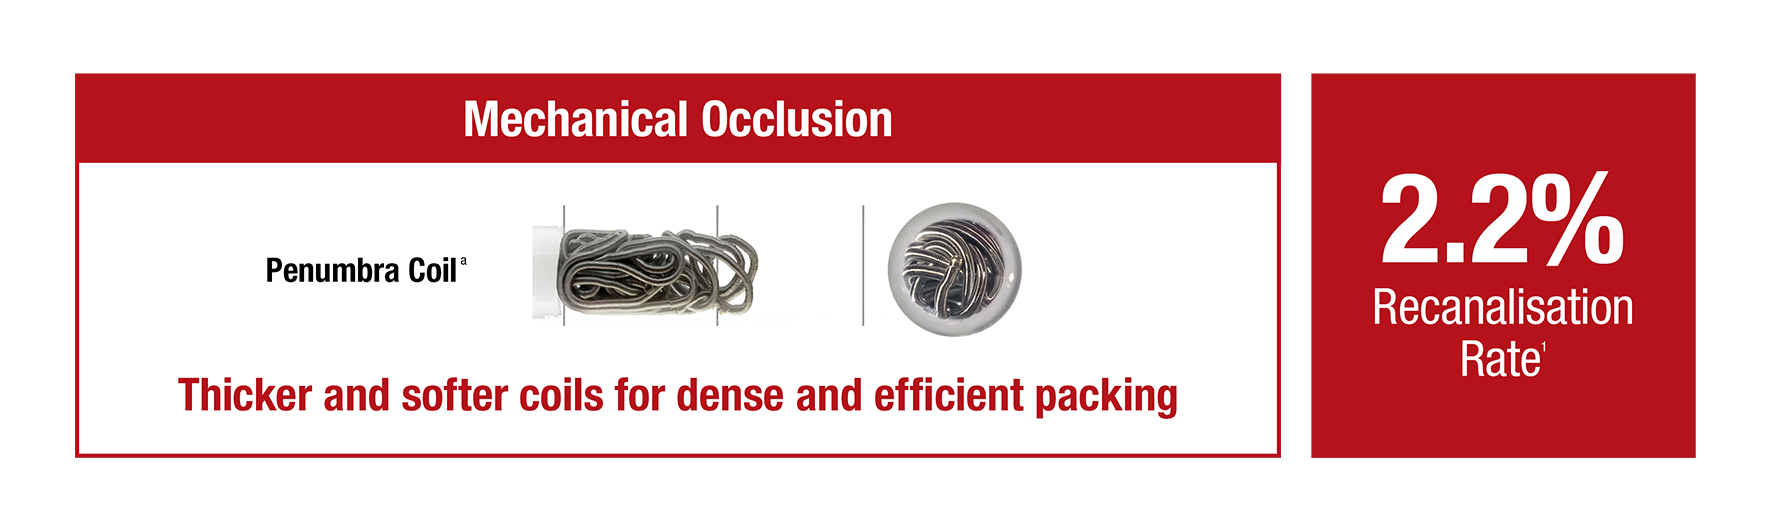 Mechanical Occlusion showcasing recanalisation rate (details below) with text "Thicker and softer coils for dense and efficient packing"